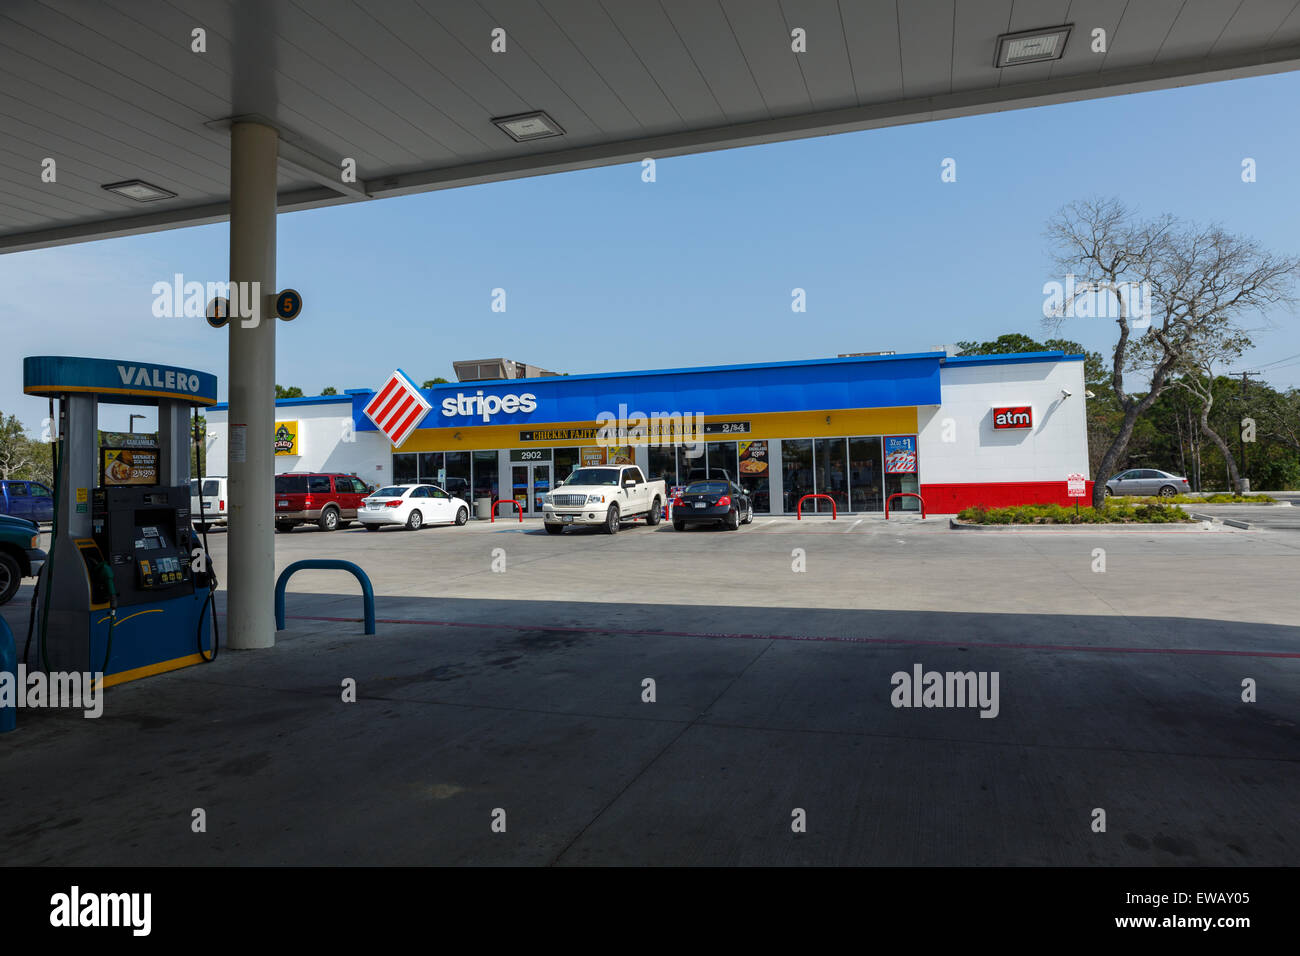 Valero gas station and Stripes convenience store Rockport Texas petrol station Stock Photo